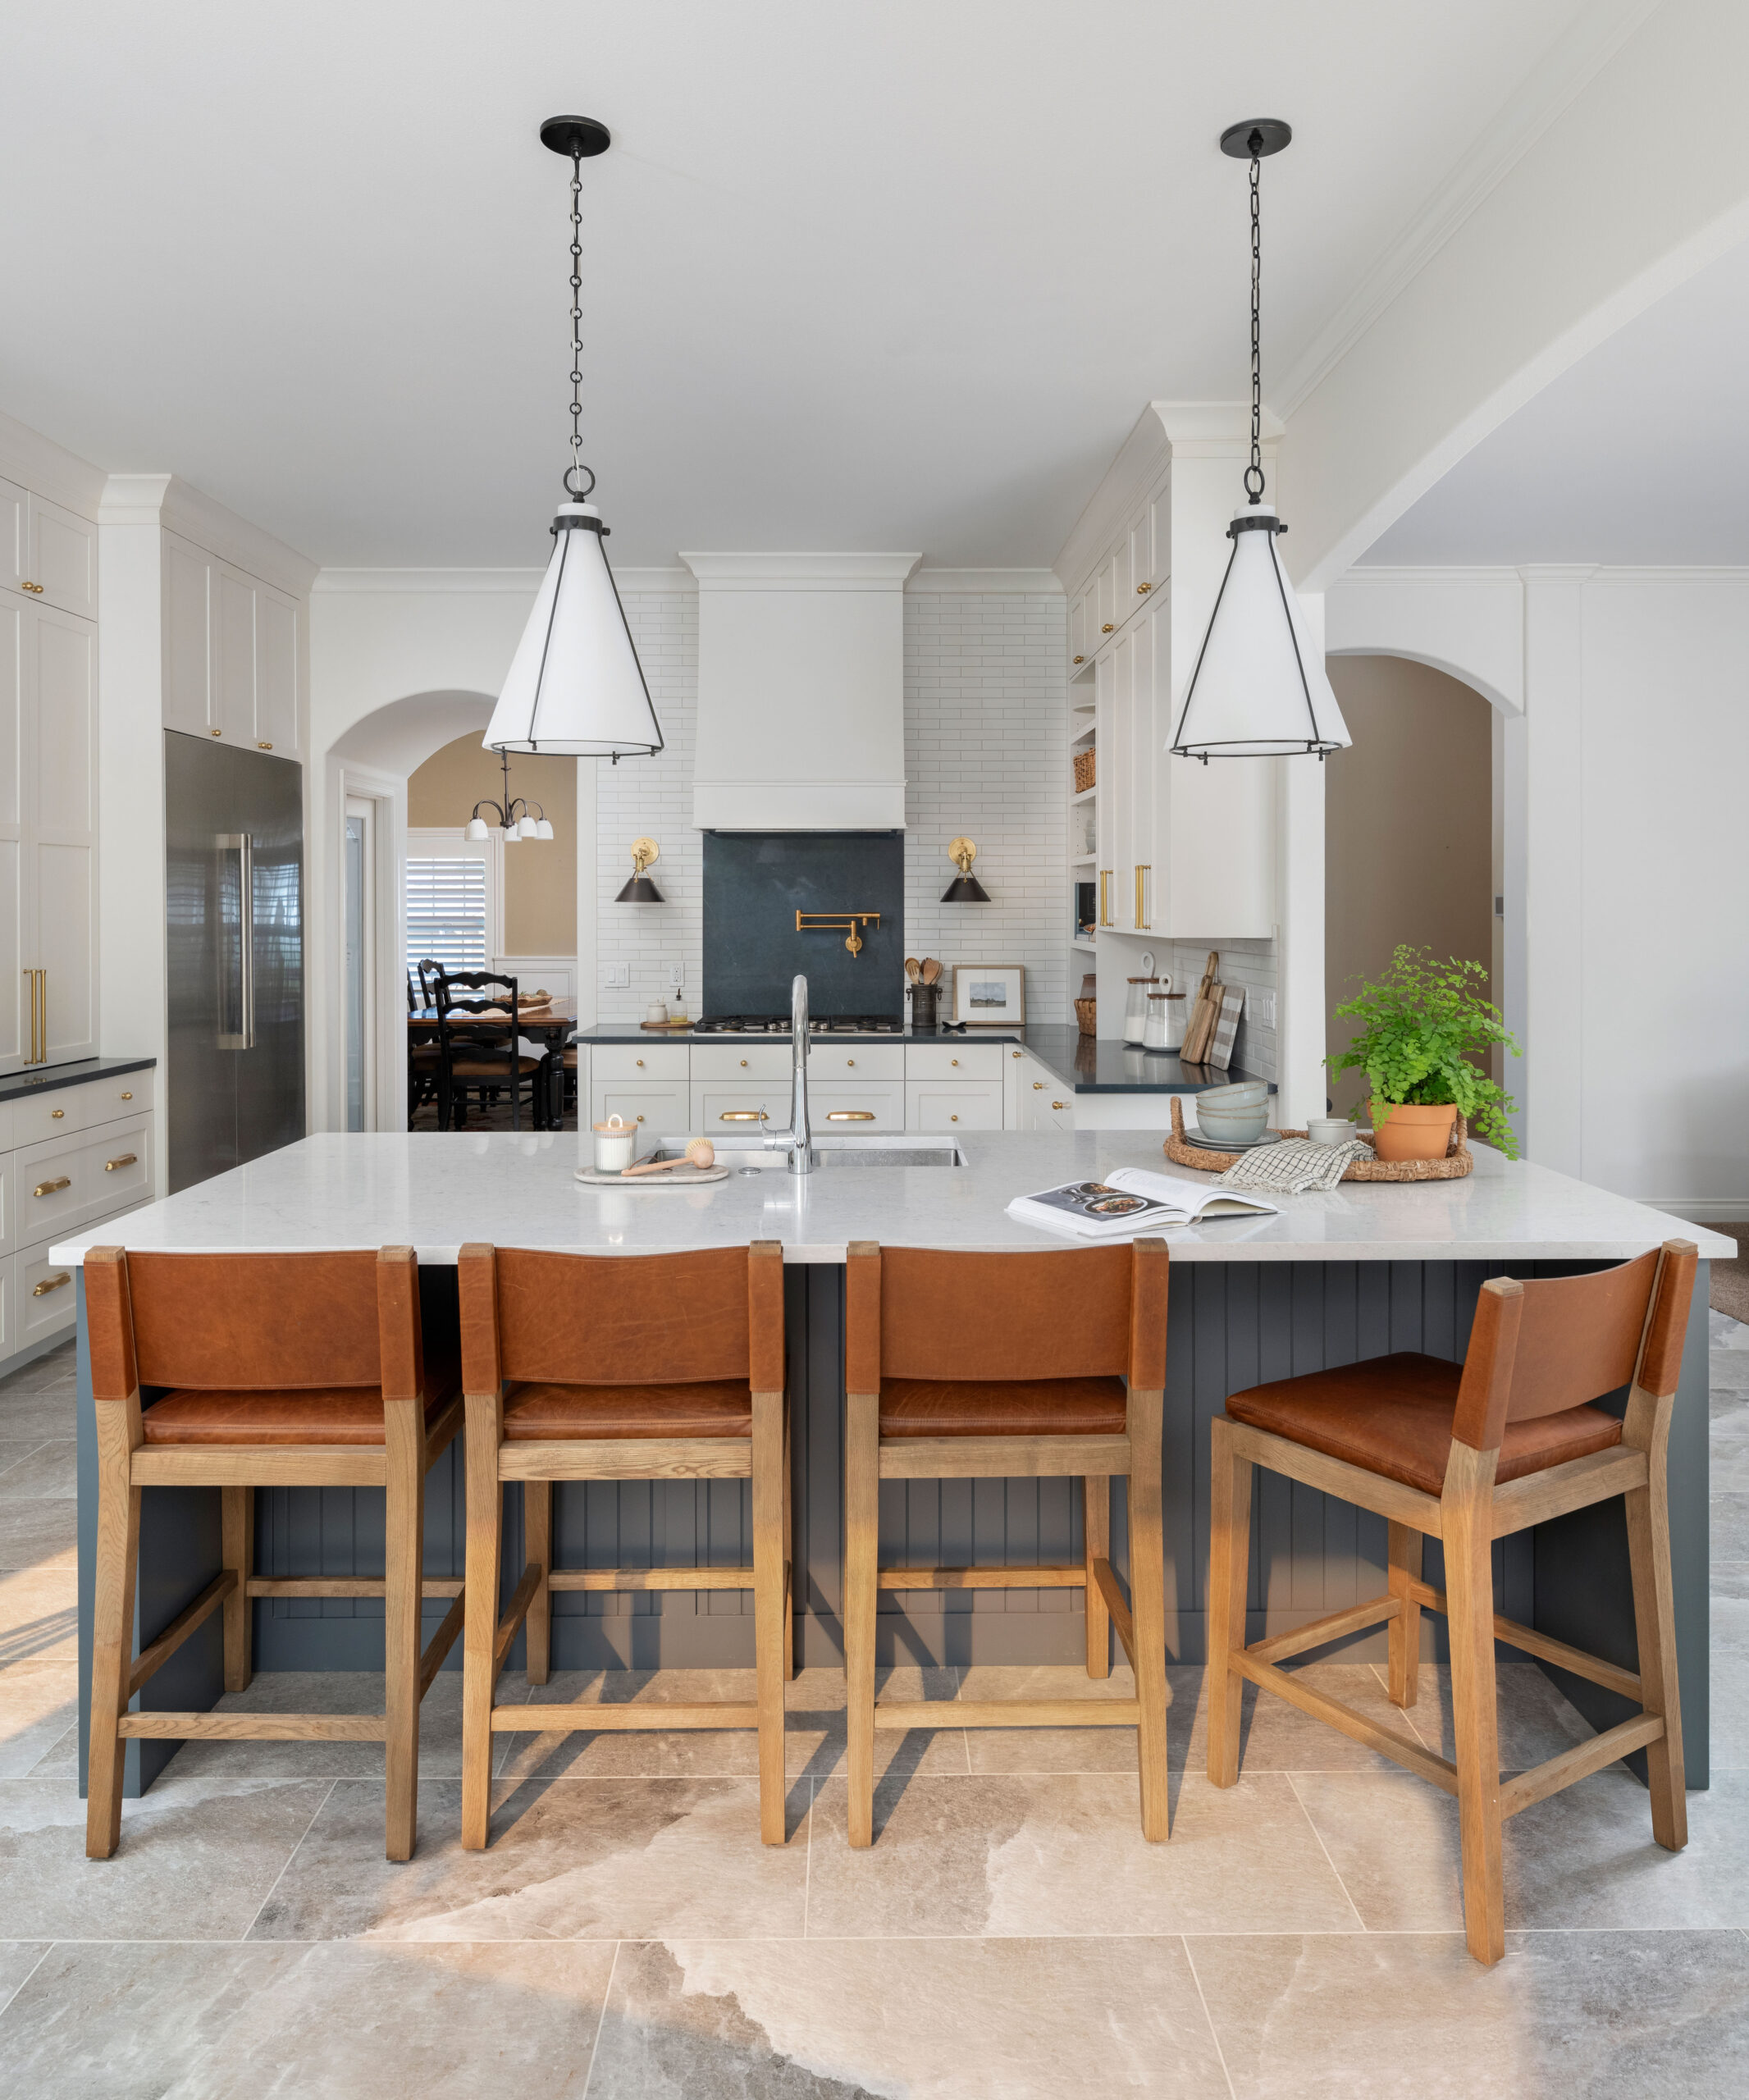 Kitchen Island Leather Chairs